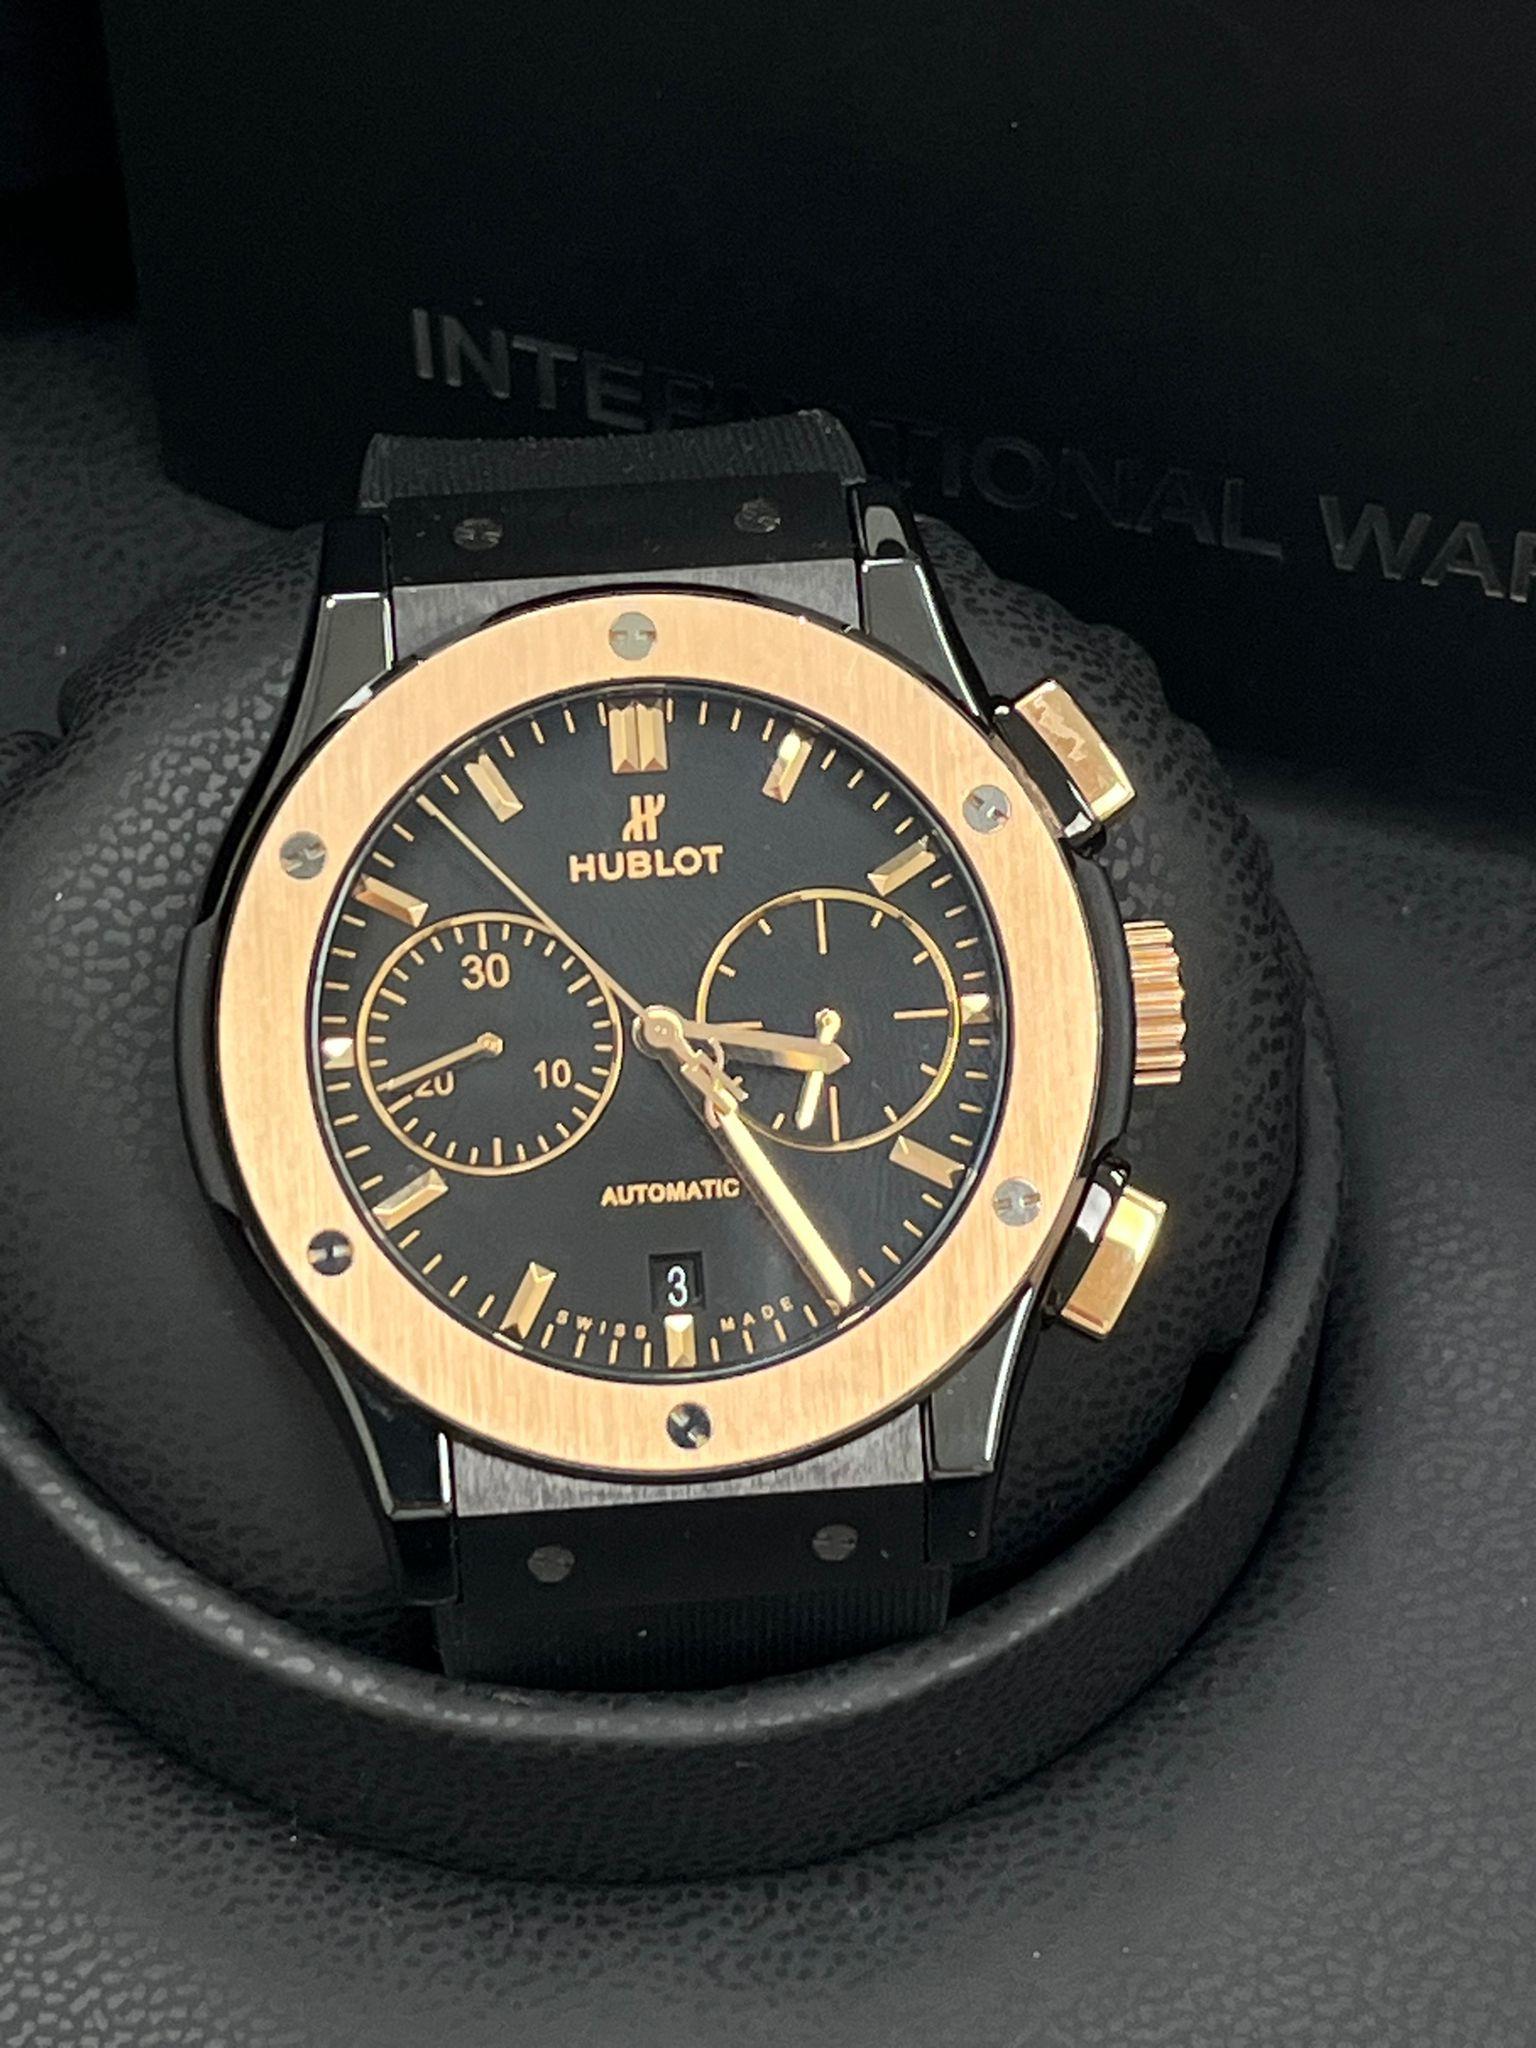 Hublot Classic Fusion Chronograph Ceramic King Gold 45mm Watch 521.CO.1181.RX For Sale 1